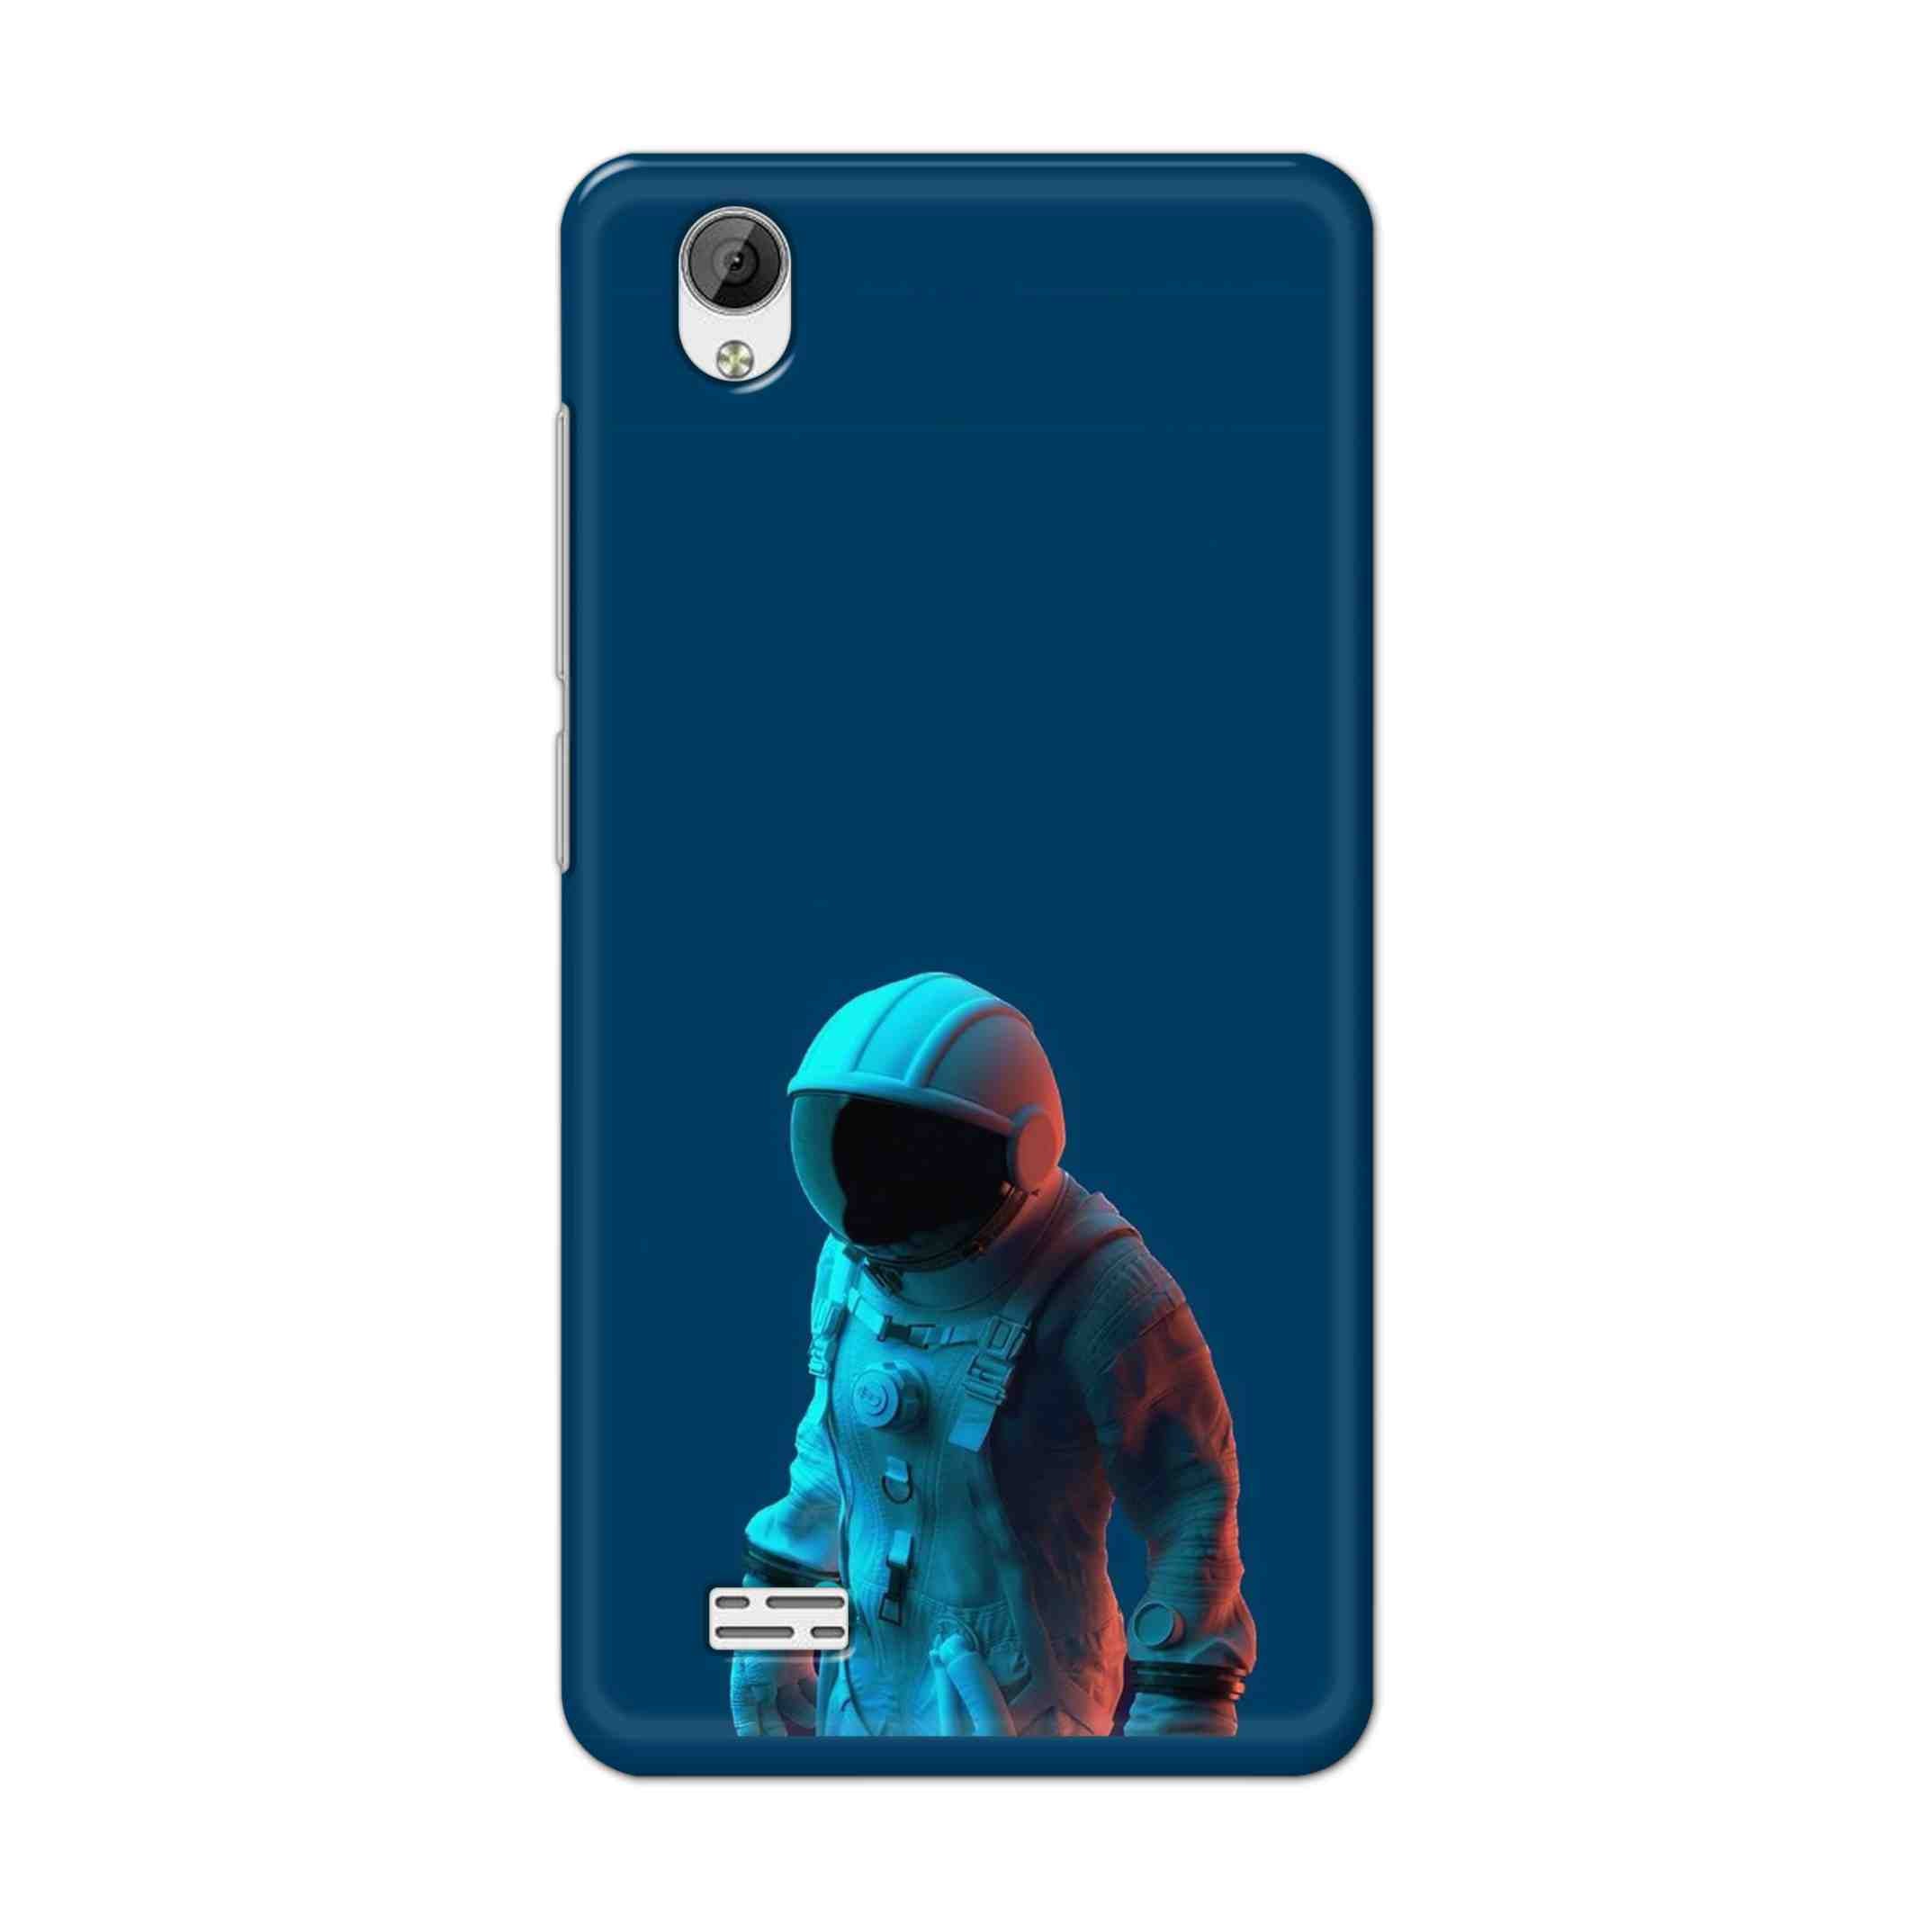 Buy Blue Astronaut Hard Back Mobile Phone Case Cover For Vivo Y31 Online